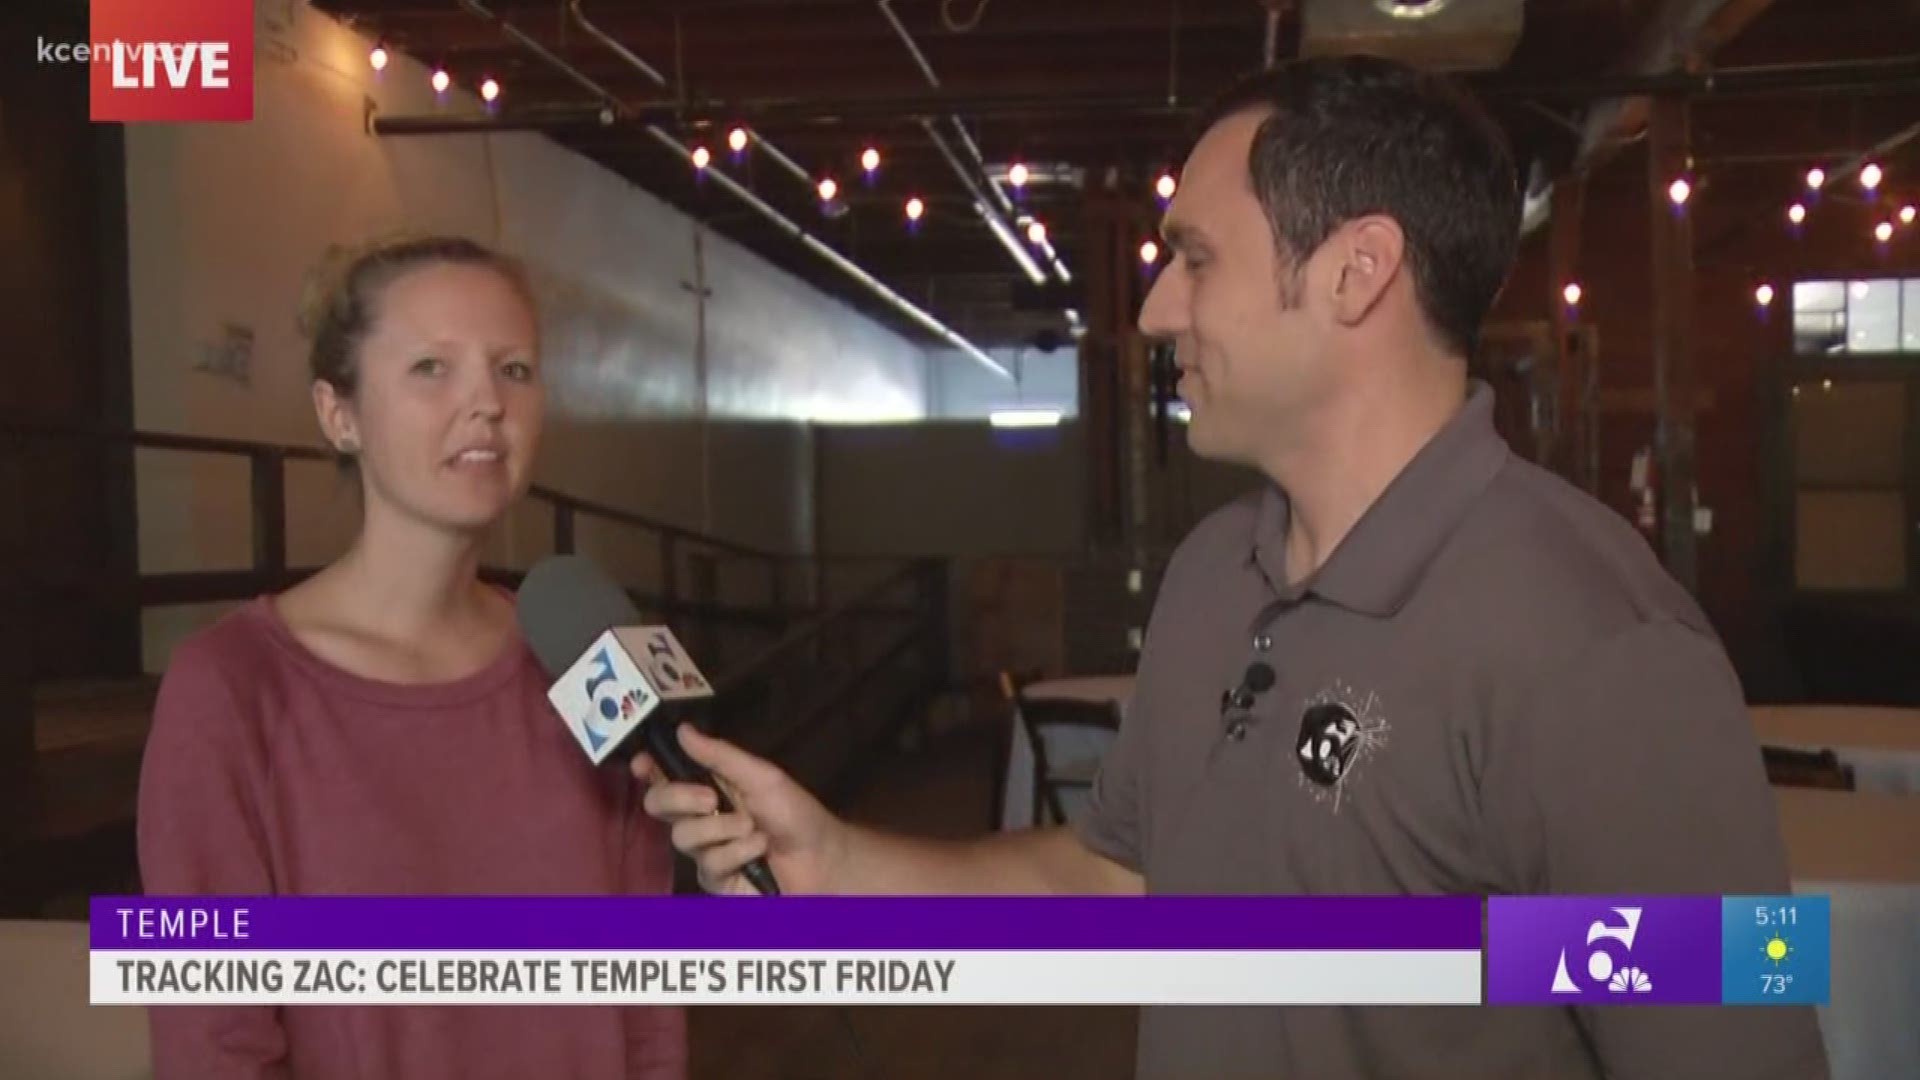 Tracking Zac: Celebrate Temple's first Friday